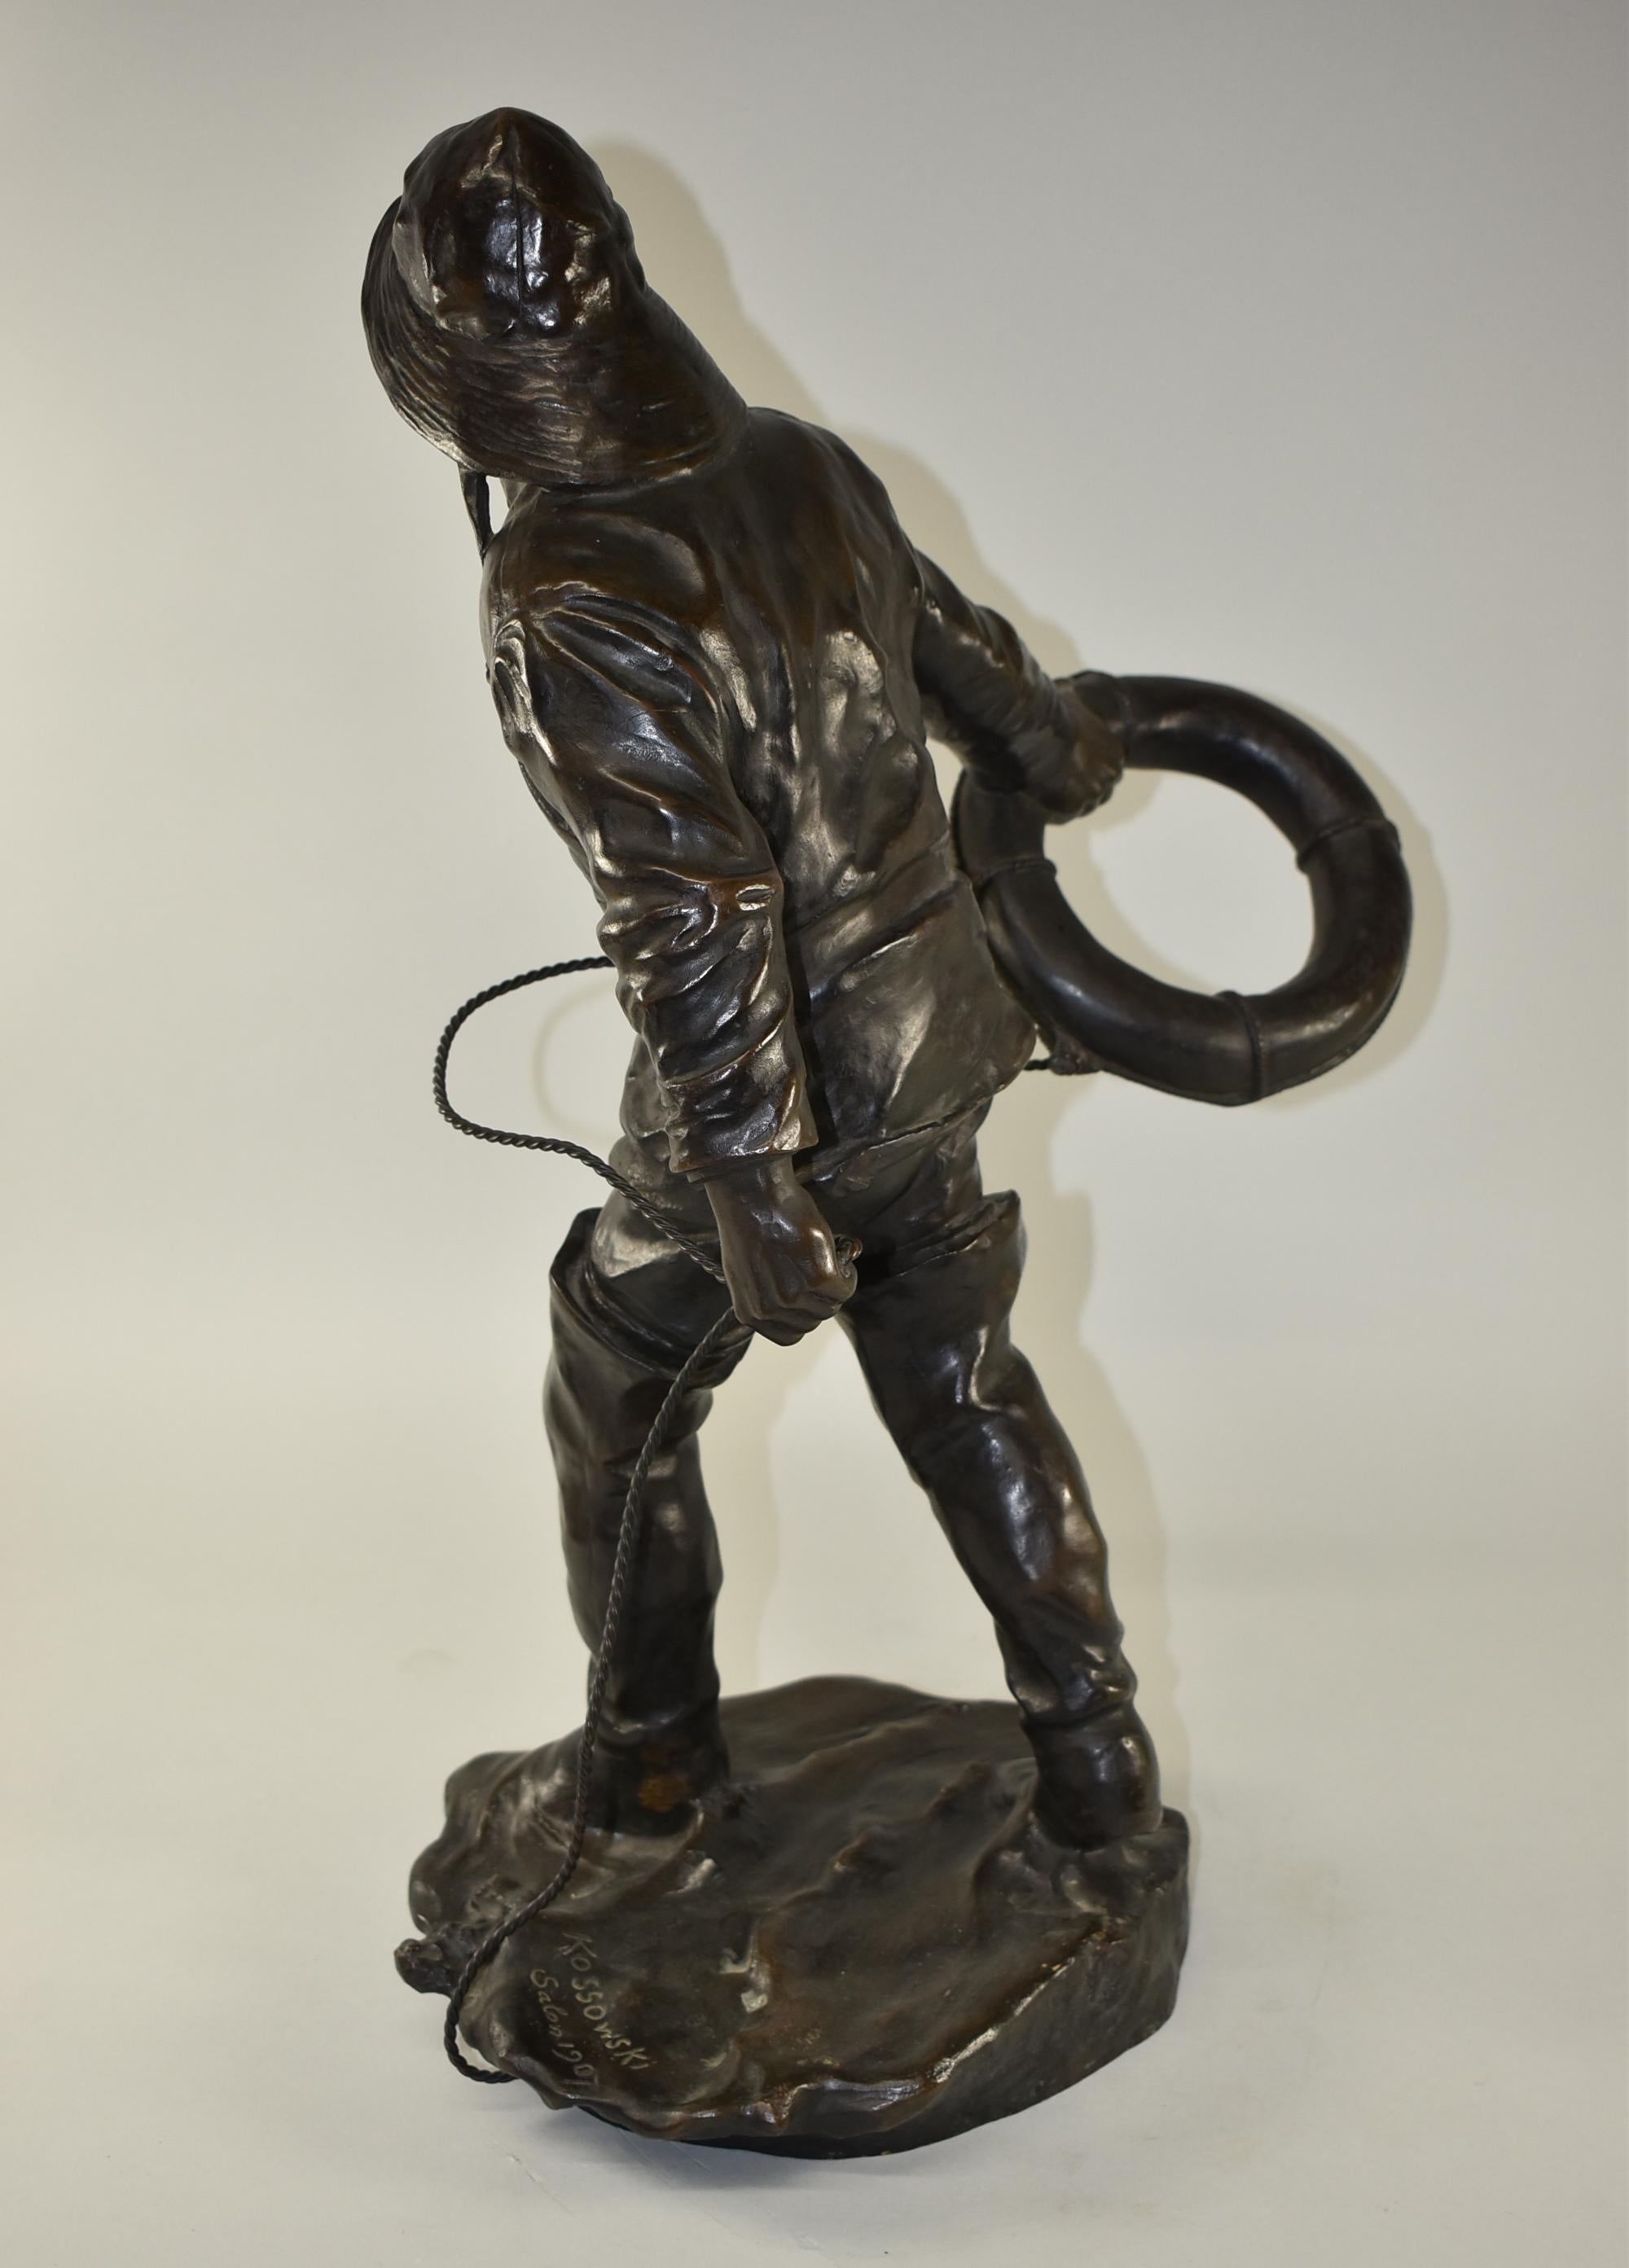 New England cast bronze sailor throwing a life preserver. Signed on the base Kossowski Salon dated 1907.